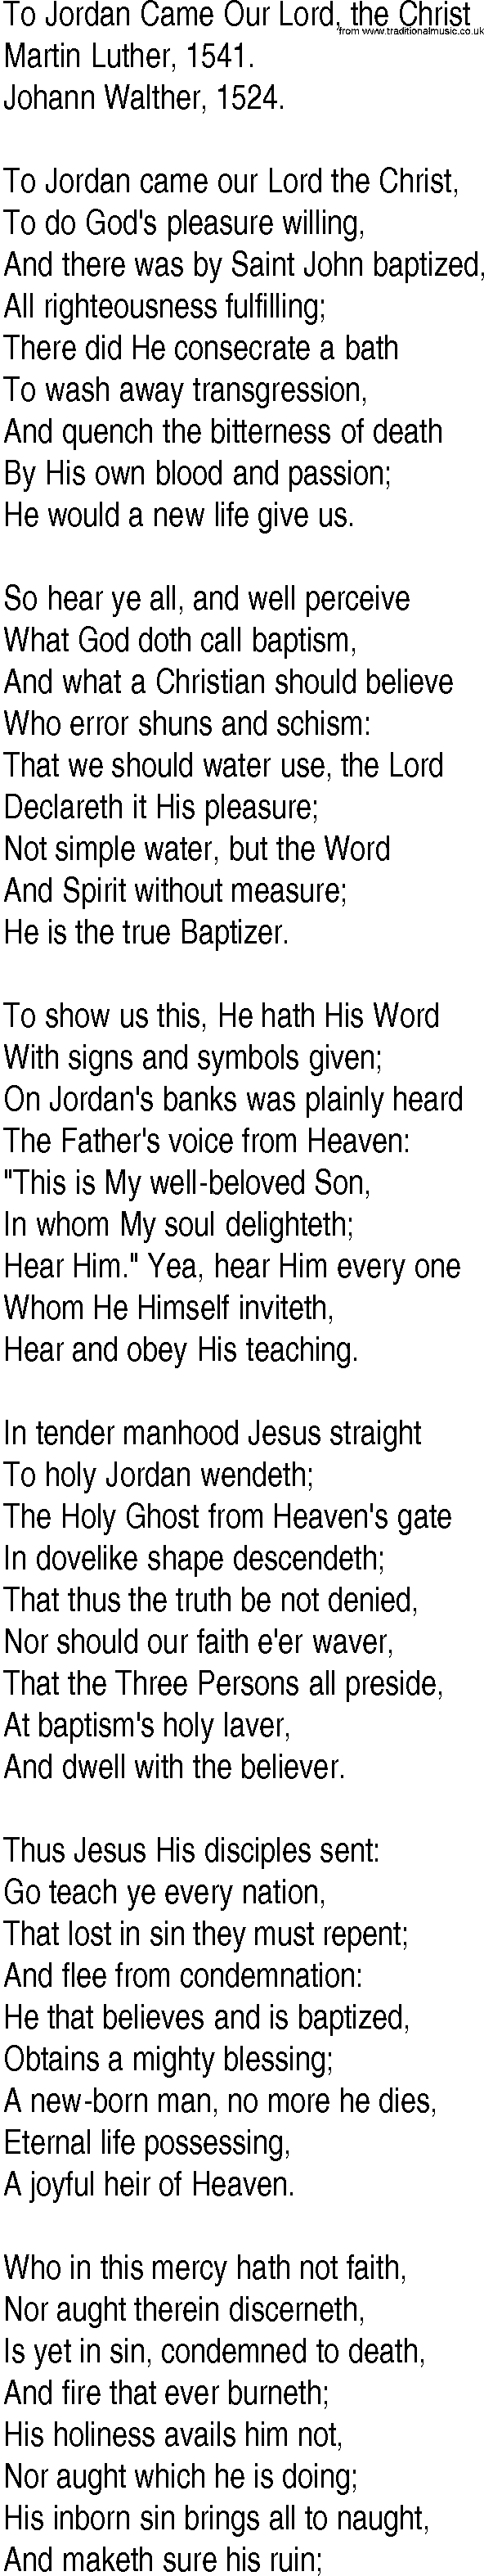 Hymn and Gospel Song: To Jordan Came Our Lord, the Christ by Martin Luther lyrics